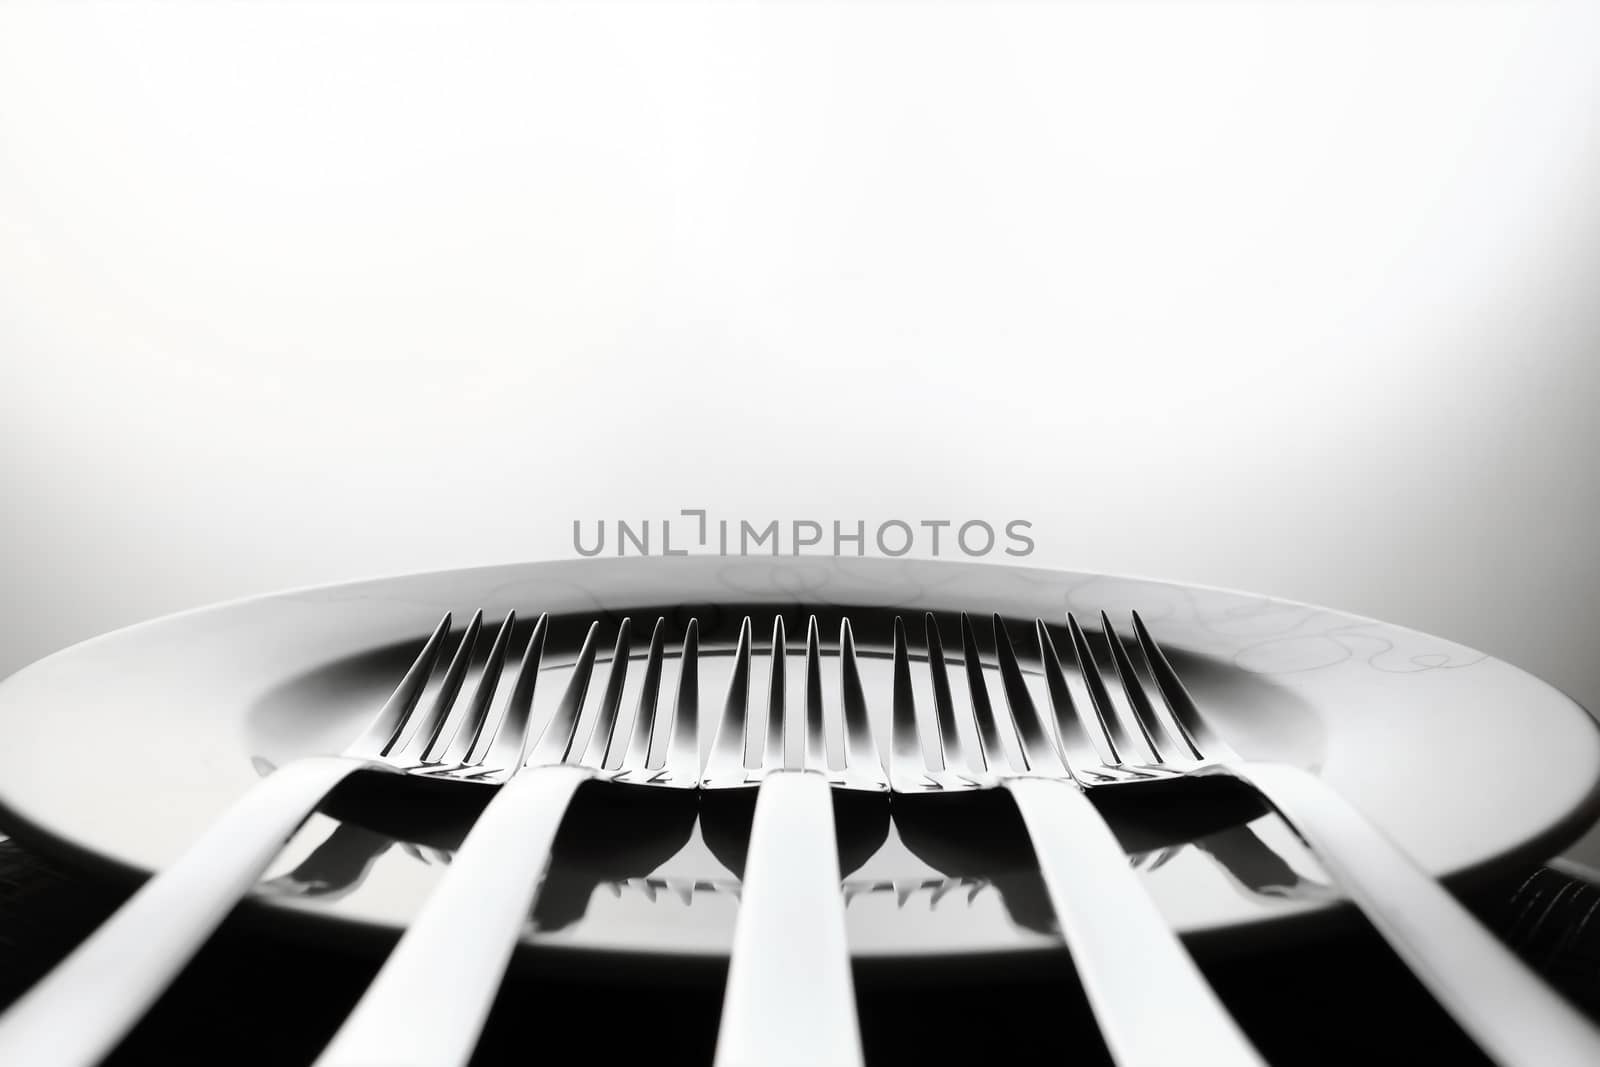 Dish and forks by dynamicfoto